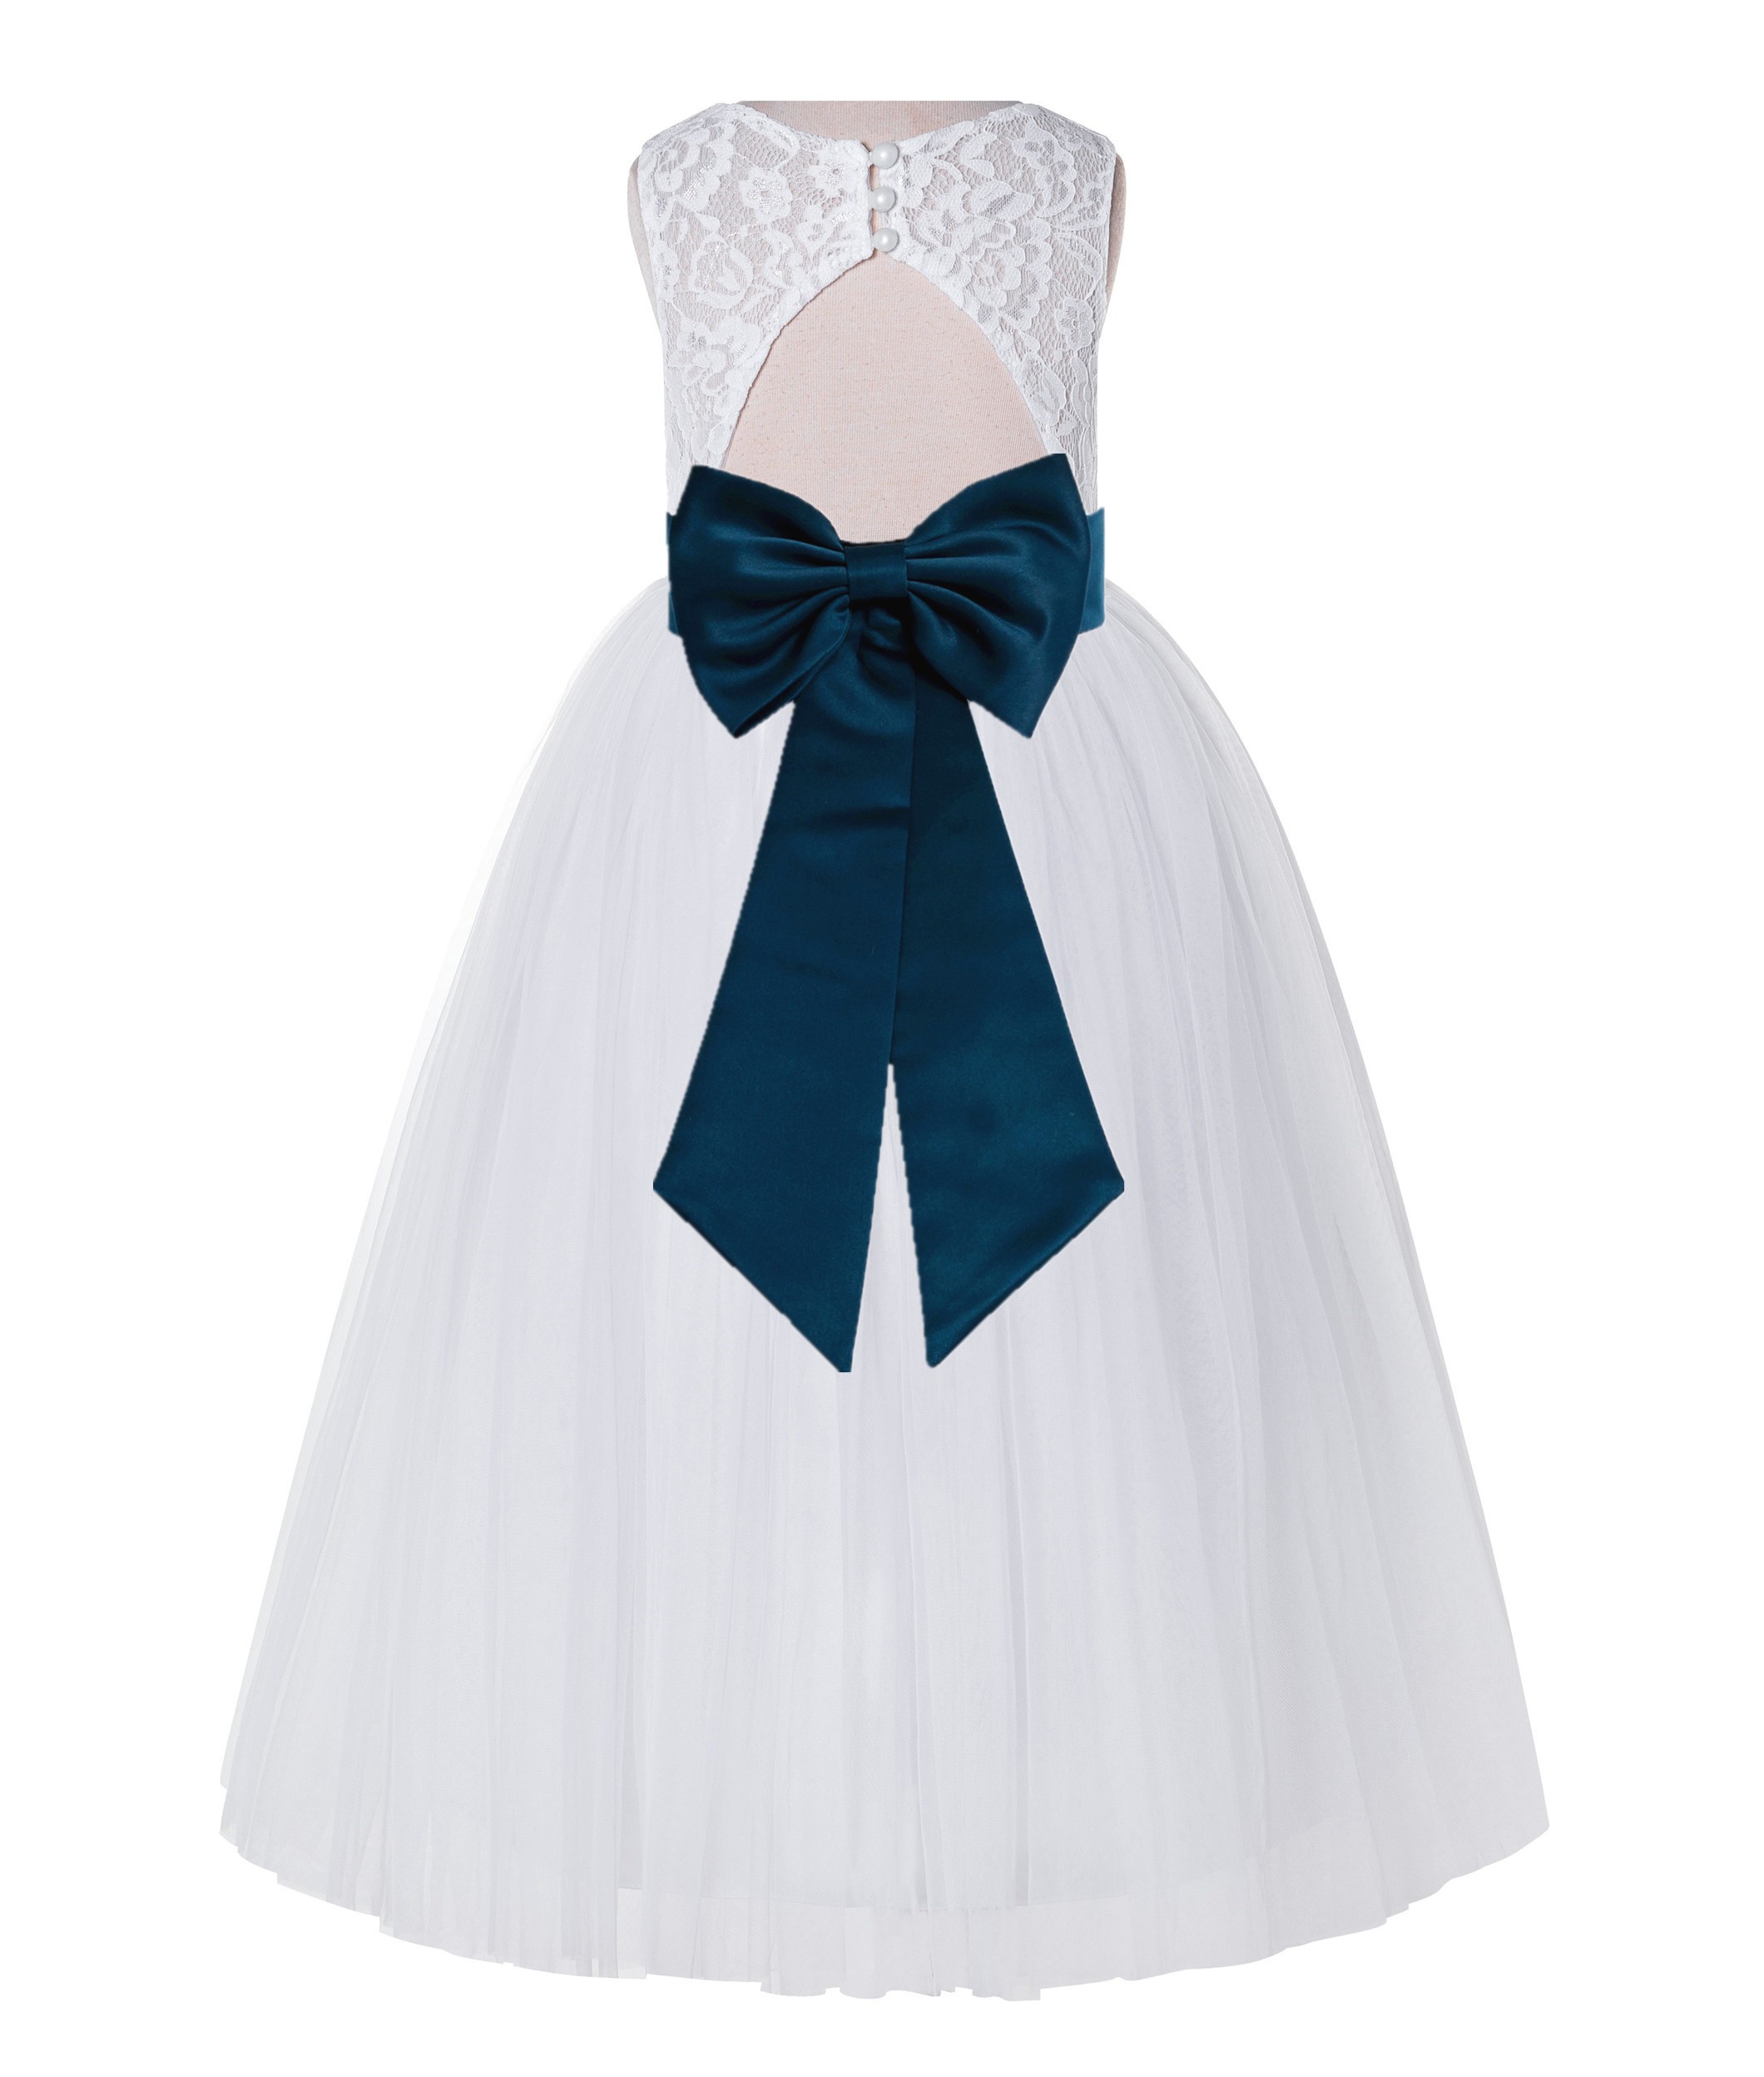 White / Peacock Blue Lace Tulle Scoop Neck Keyhole Back A-Line Flower Girl Dress 178